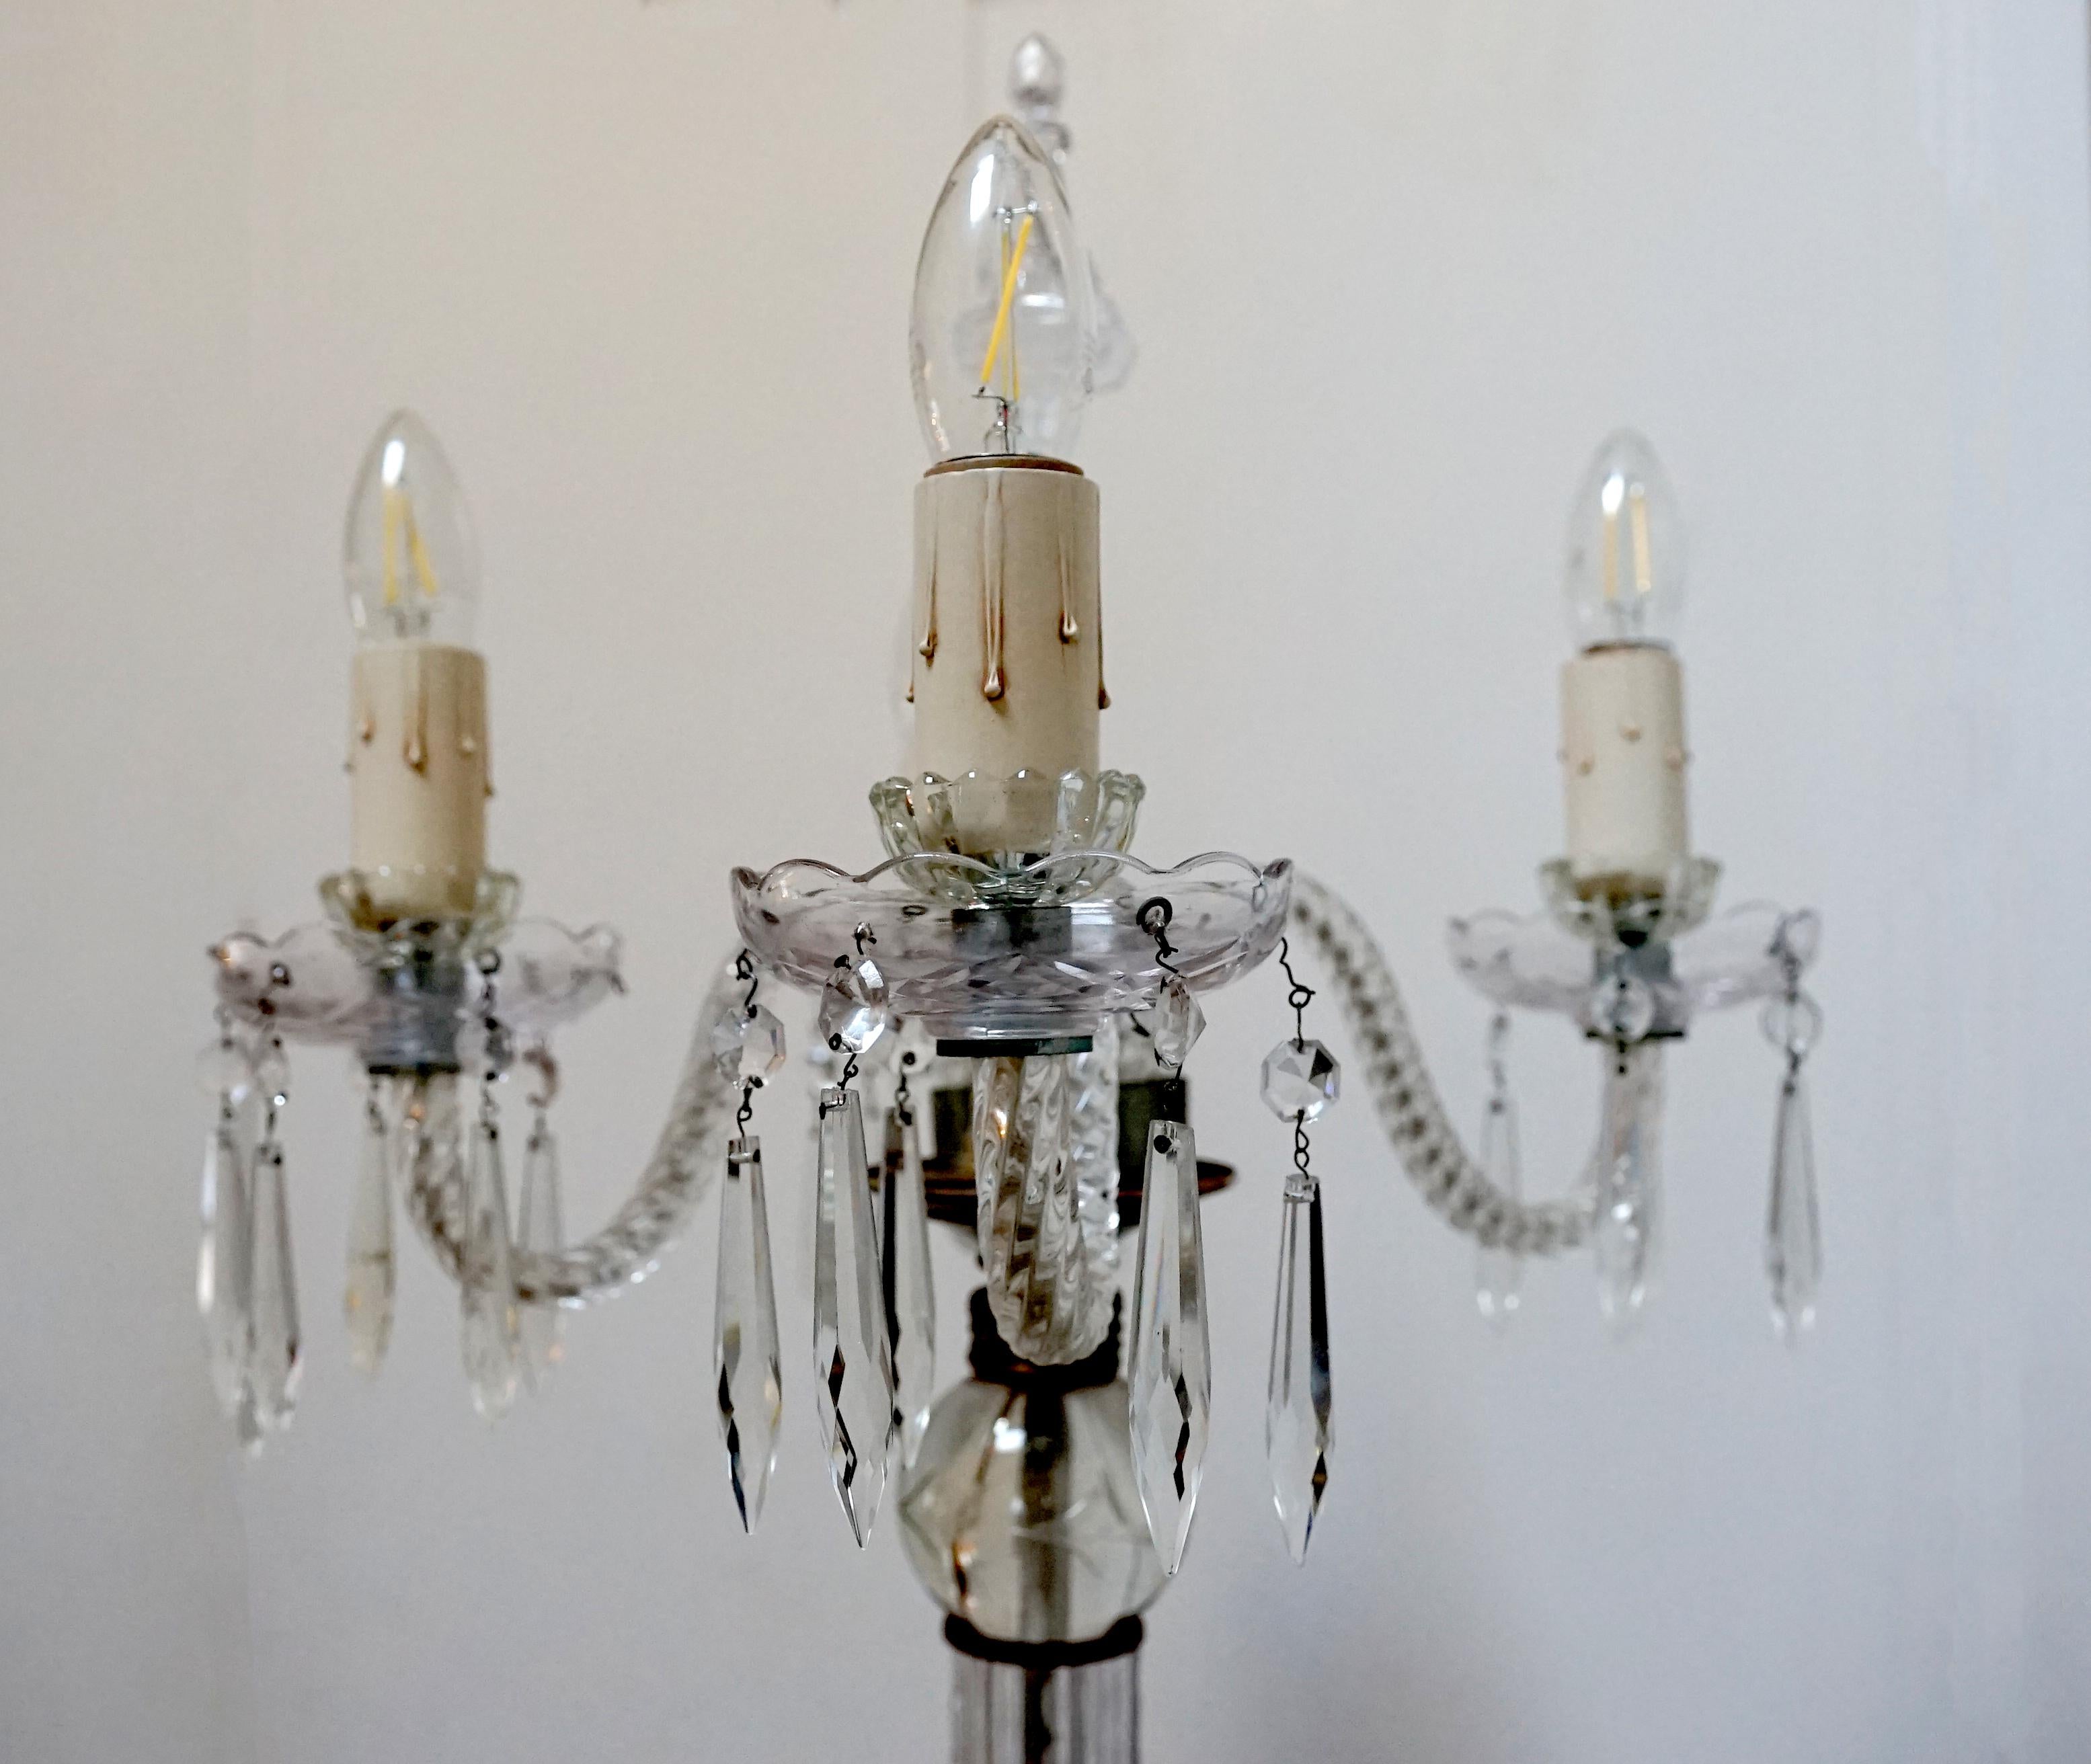 This is a a vintage Venetian hand-blown glass, chandelier with a four-light floor lamp circa 1920-1950. The appraiser says it is unique and could be from Murano. 
This piece has a story. It has been a project of 2022 for me. When I discovered it, it